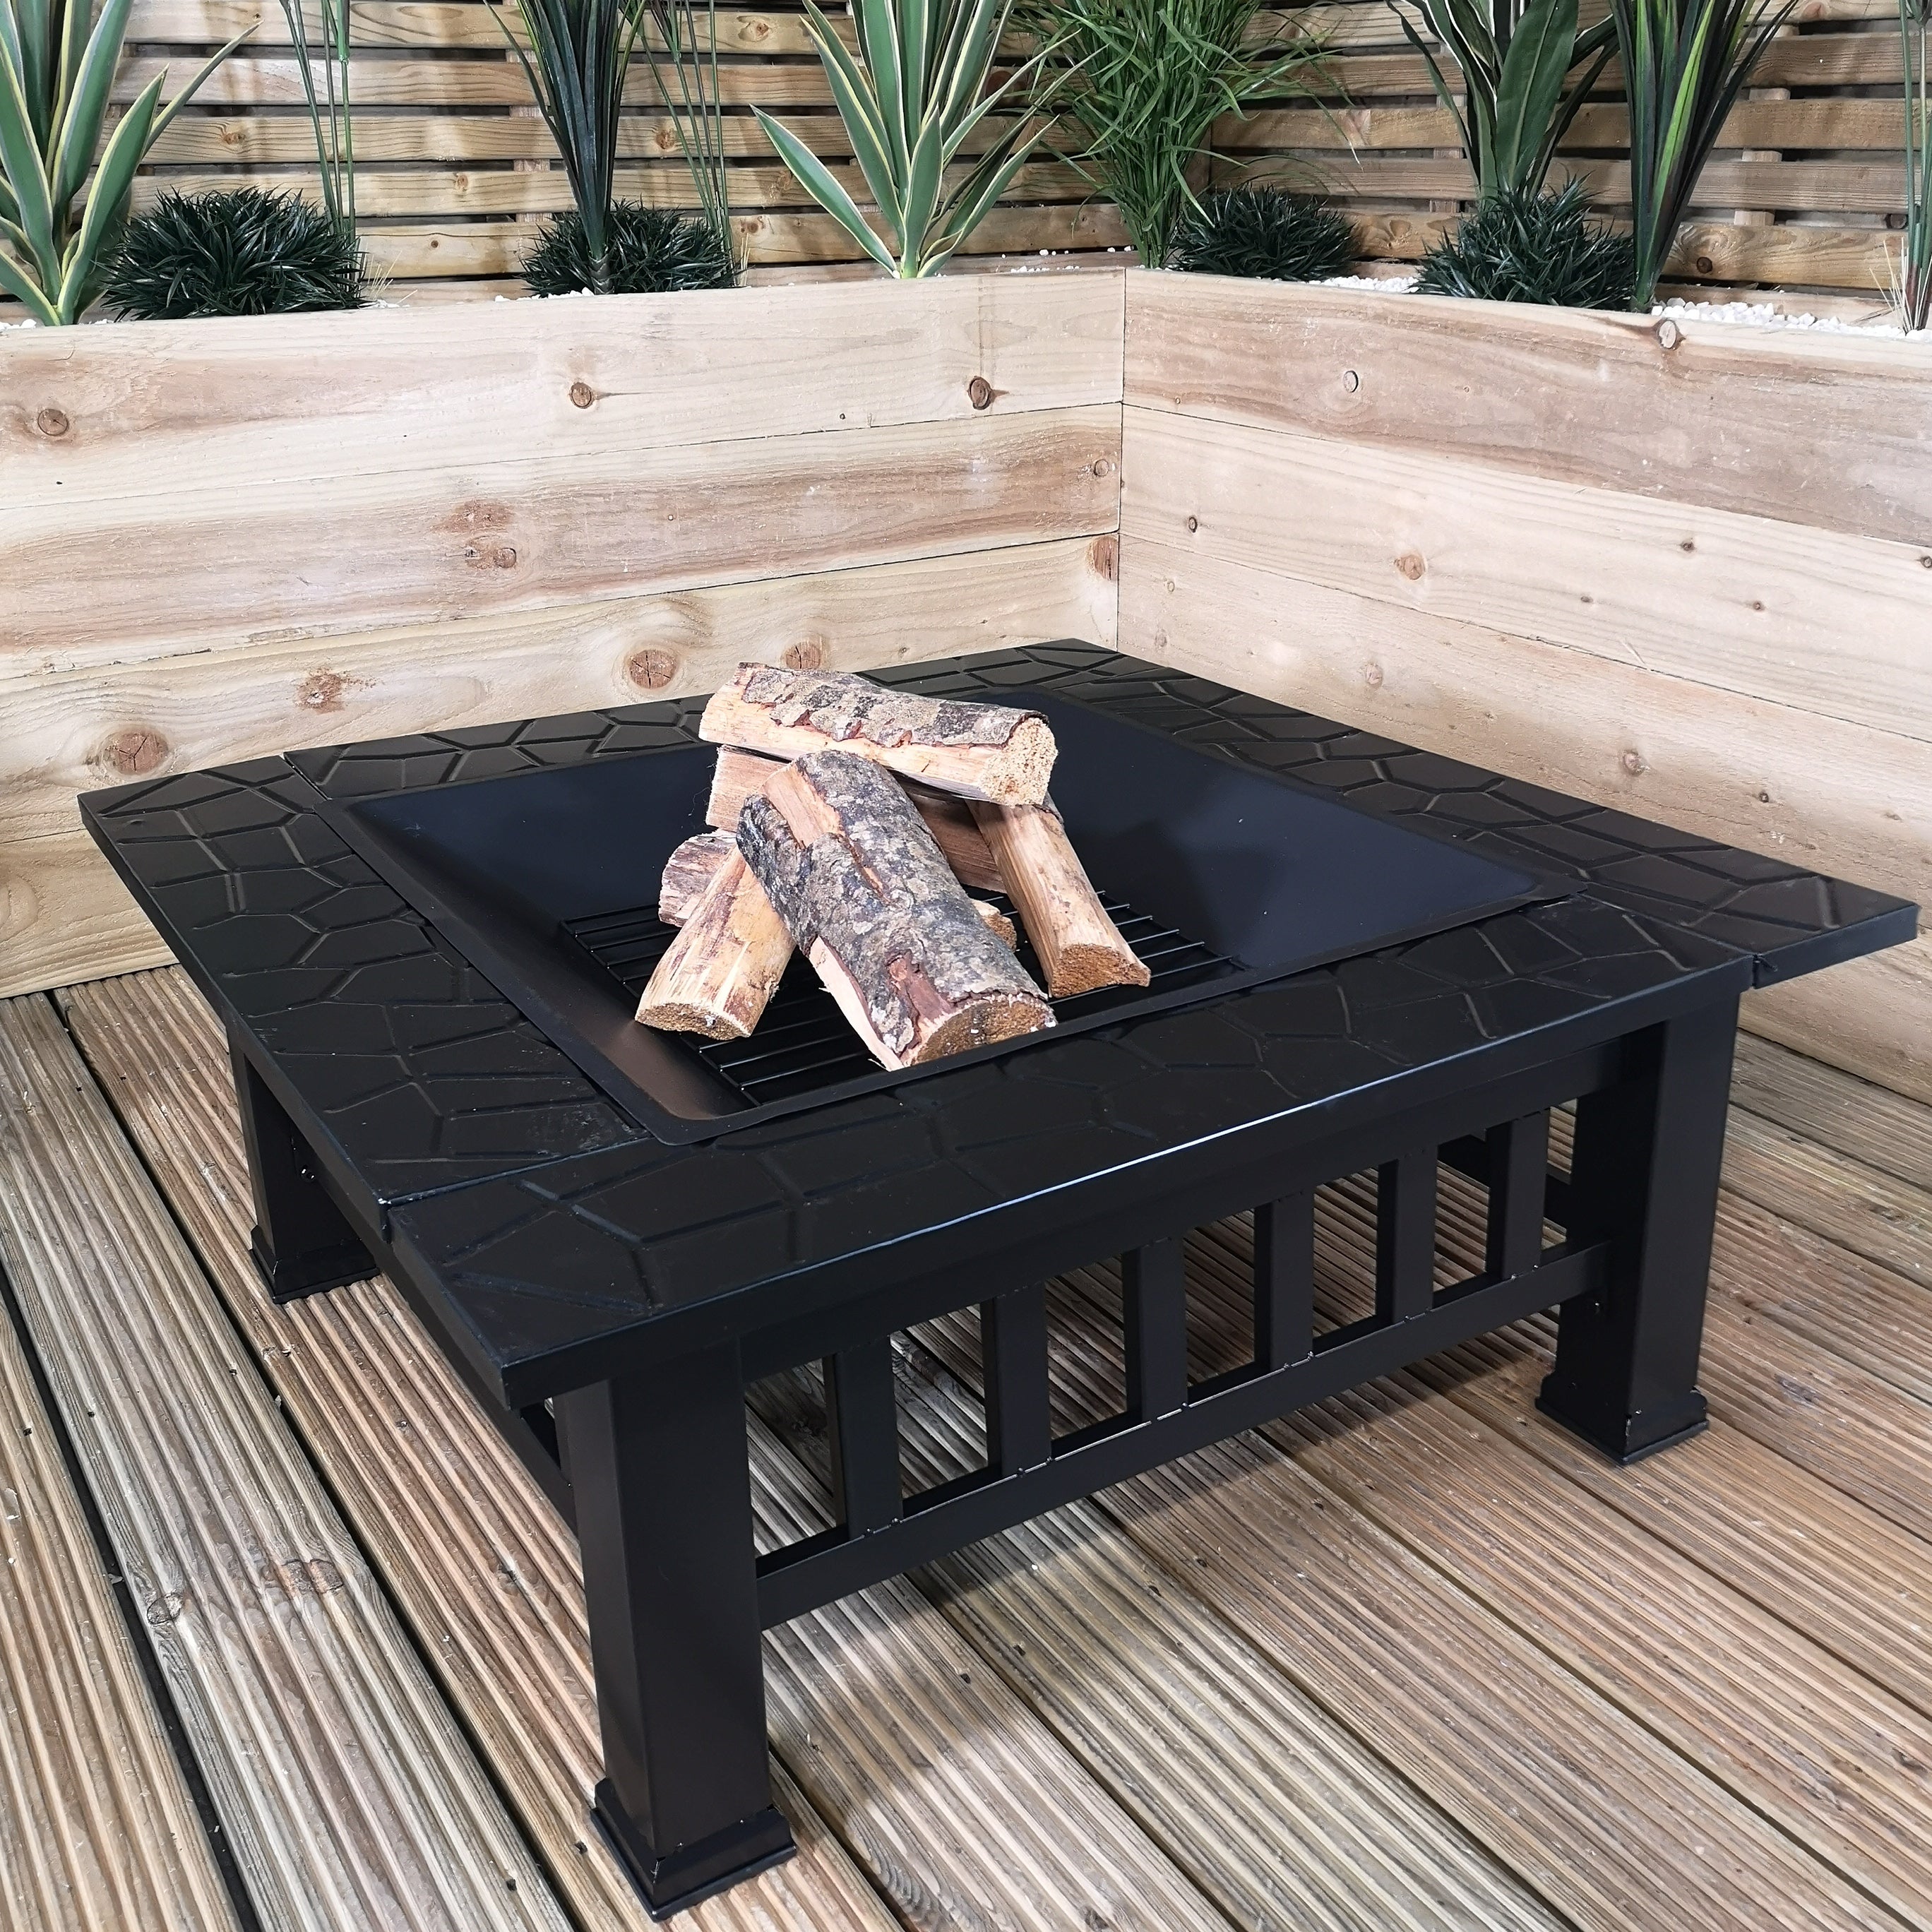 Redwood Outdoor Garden Square Fire Pit Heater with BBQ Grill in Black